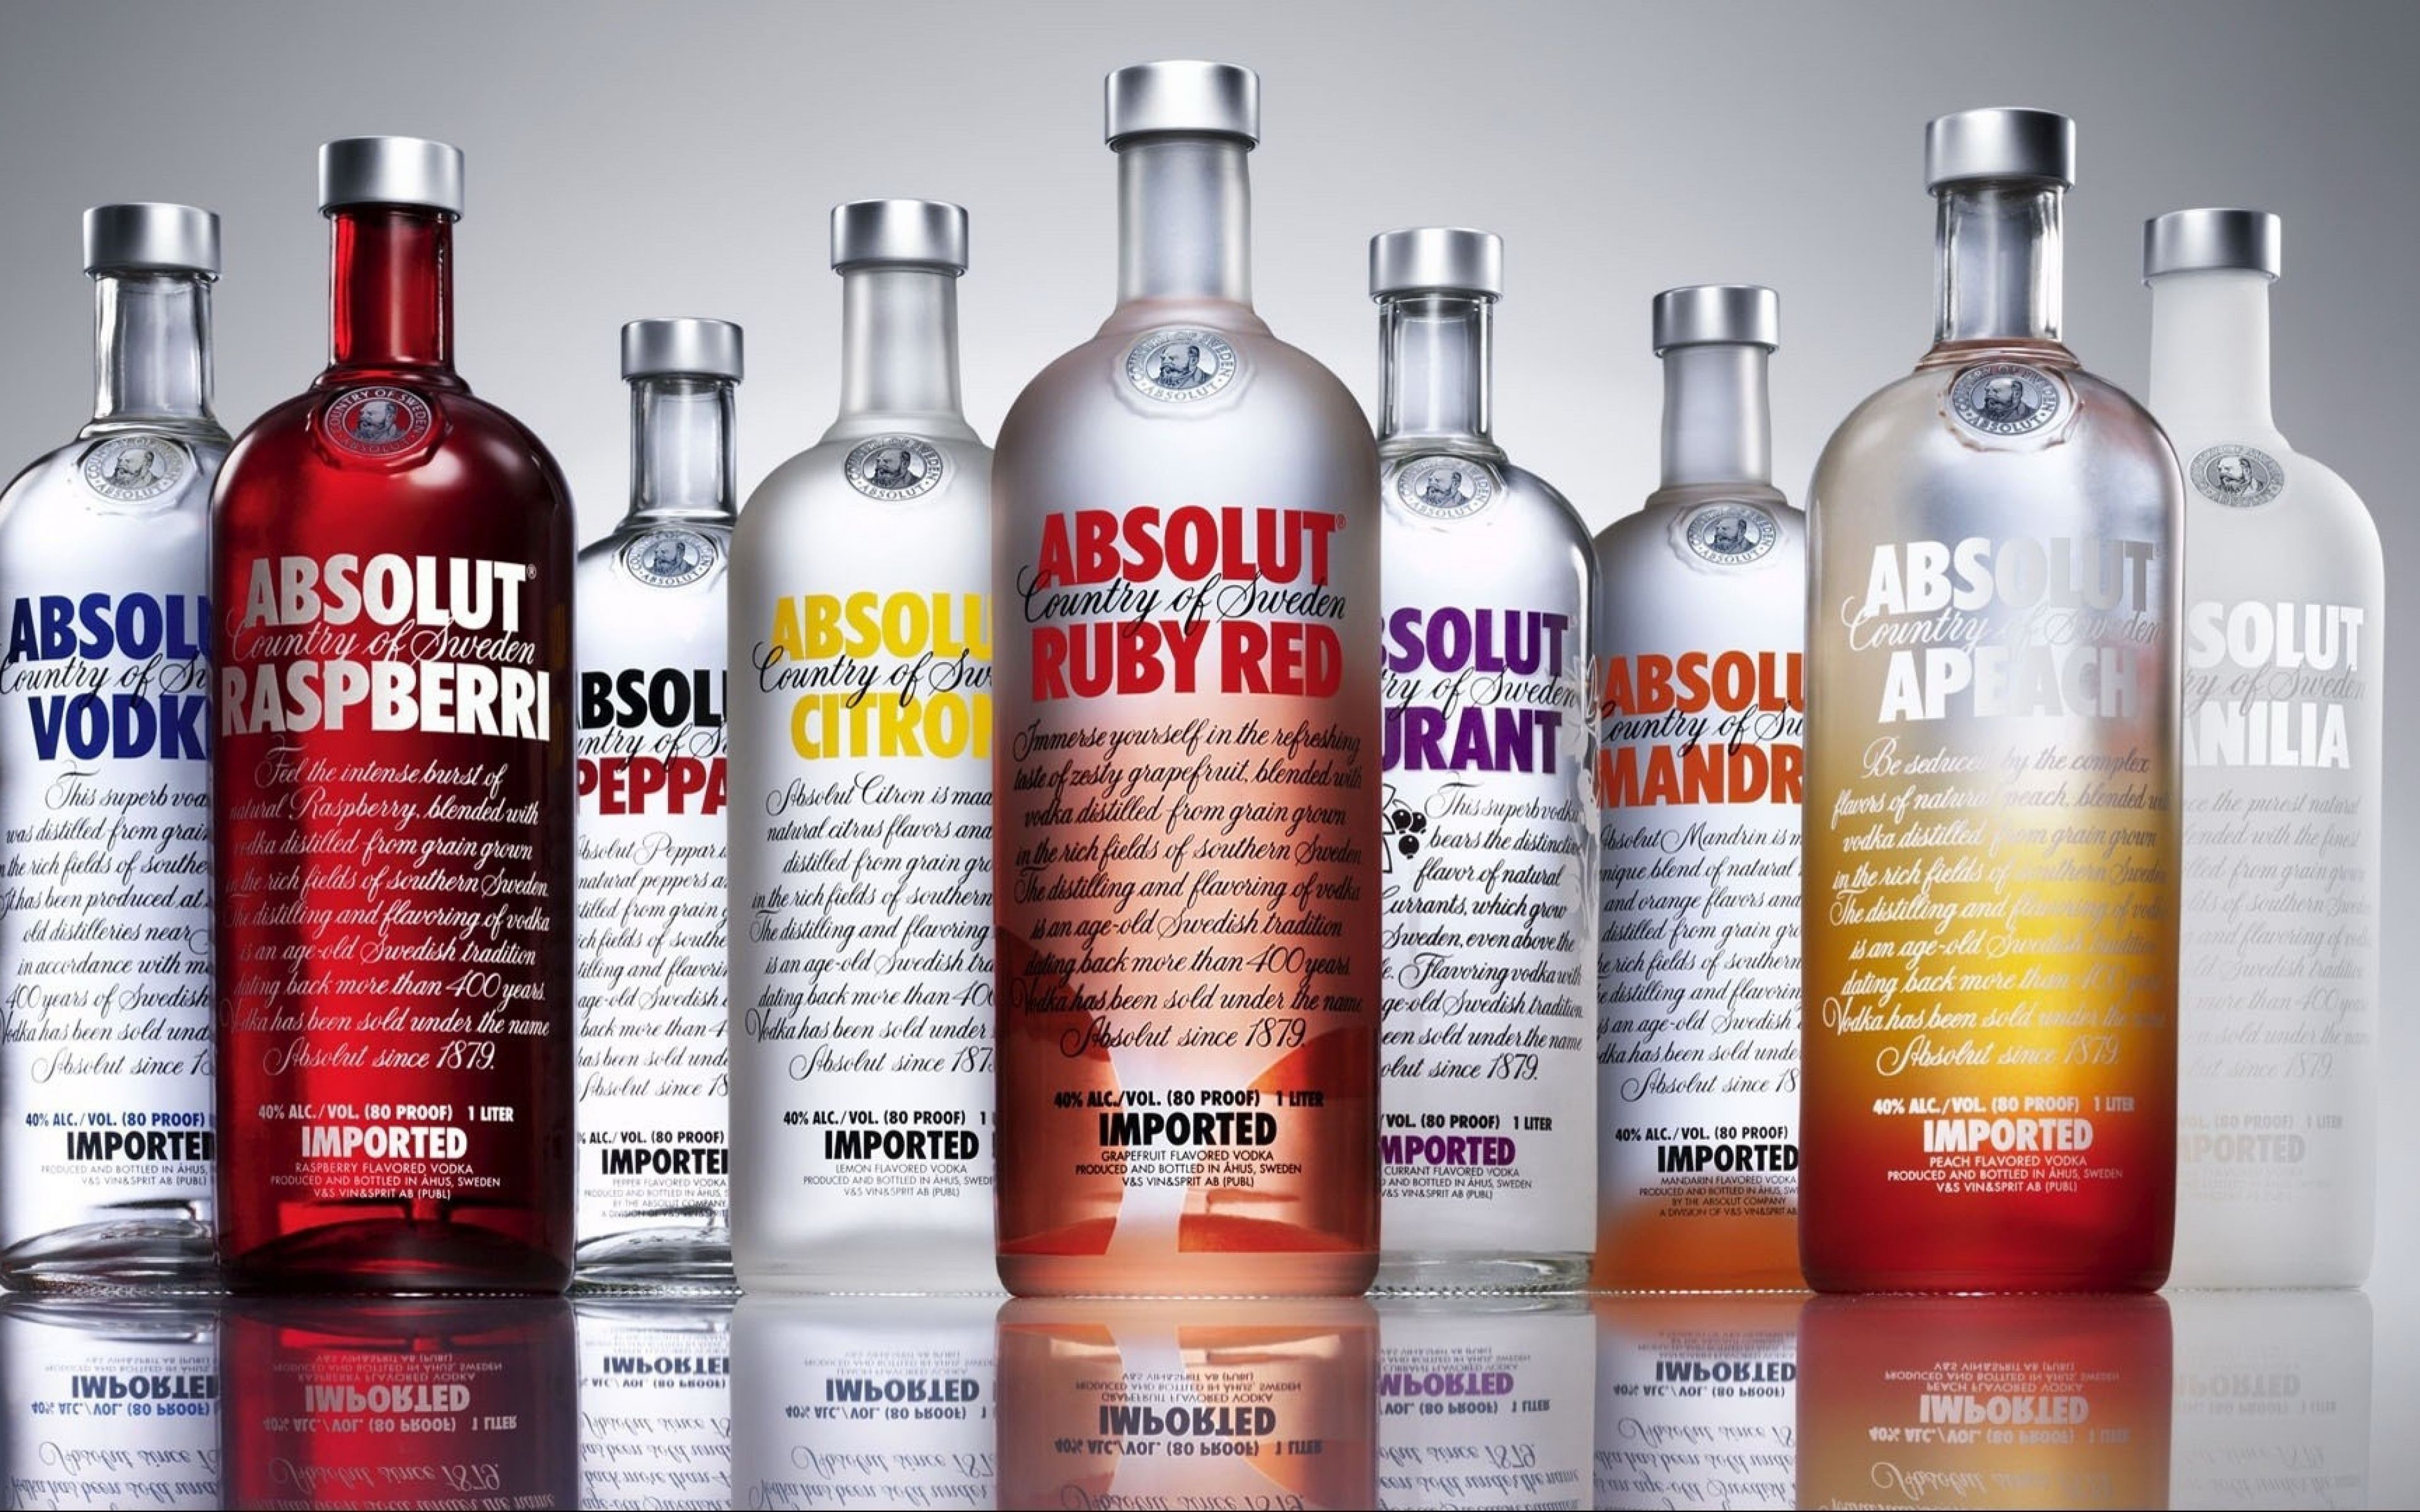 Download Wallpaper 3840x2400 Absolut, Vodka, Alcohol, Collection